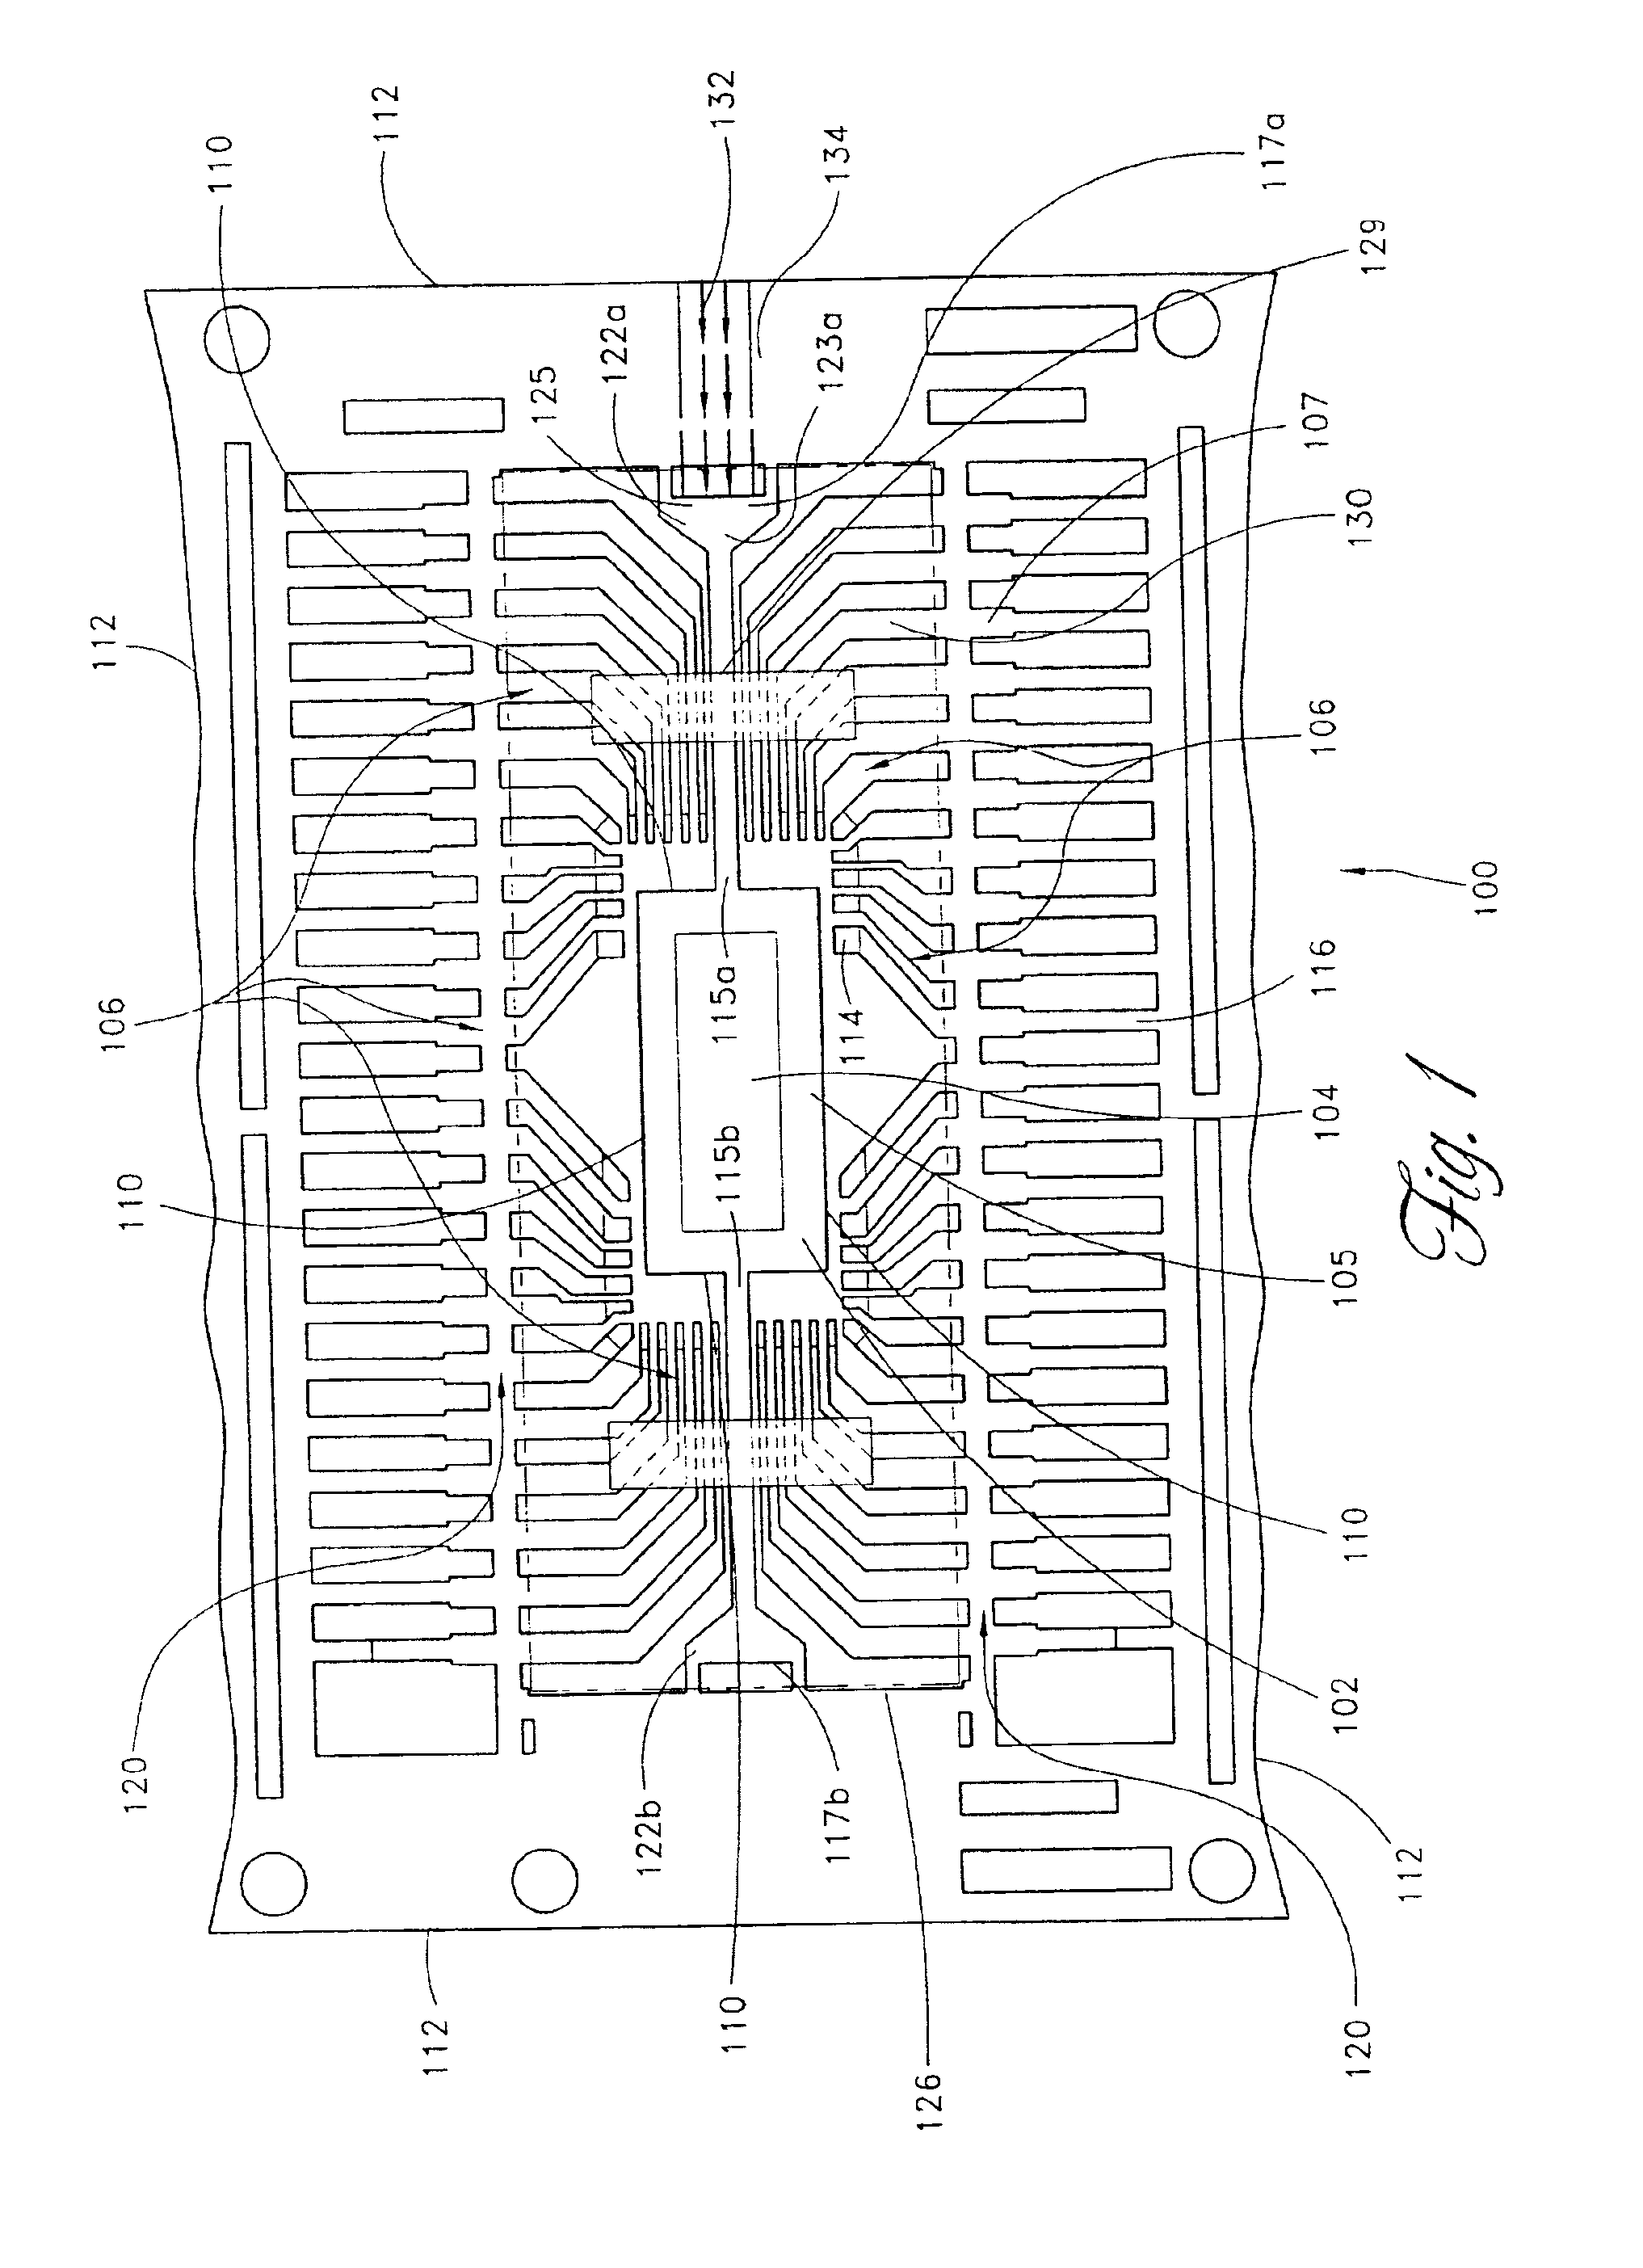 Leadframe alteration to direct compound flow into package